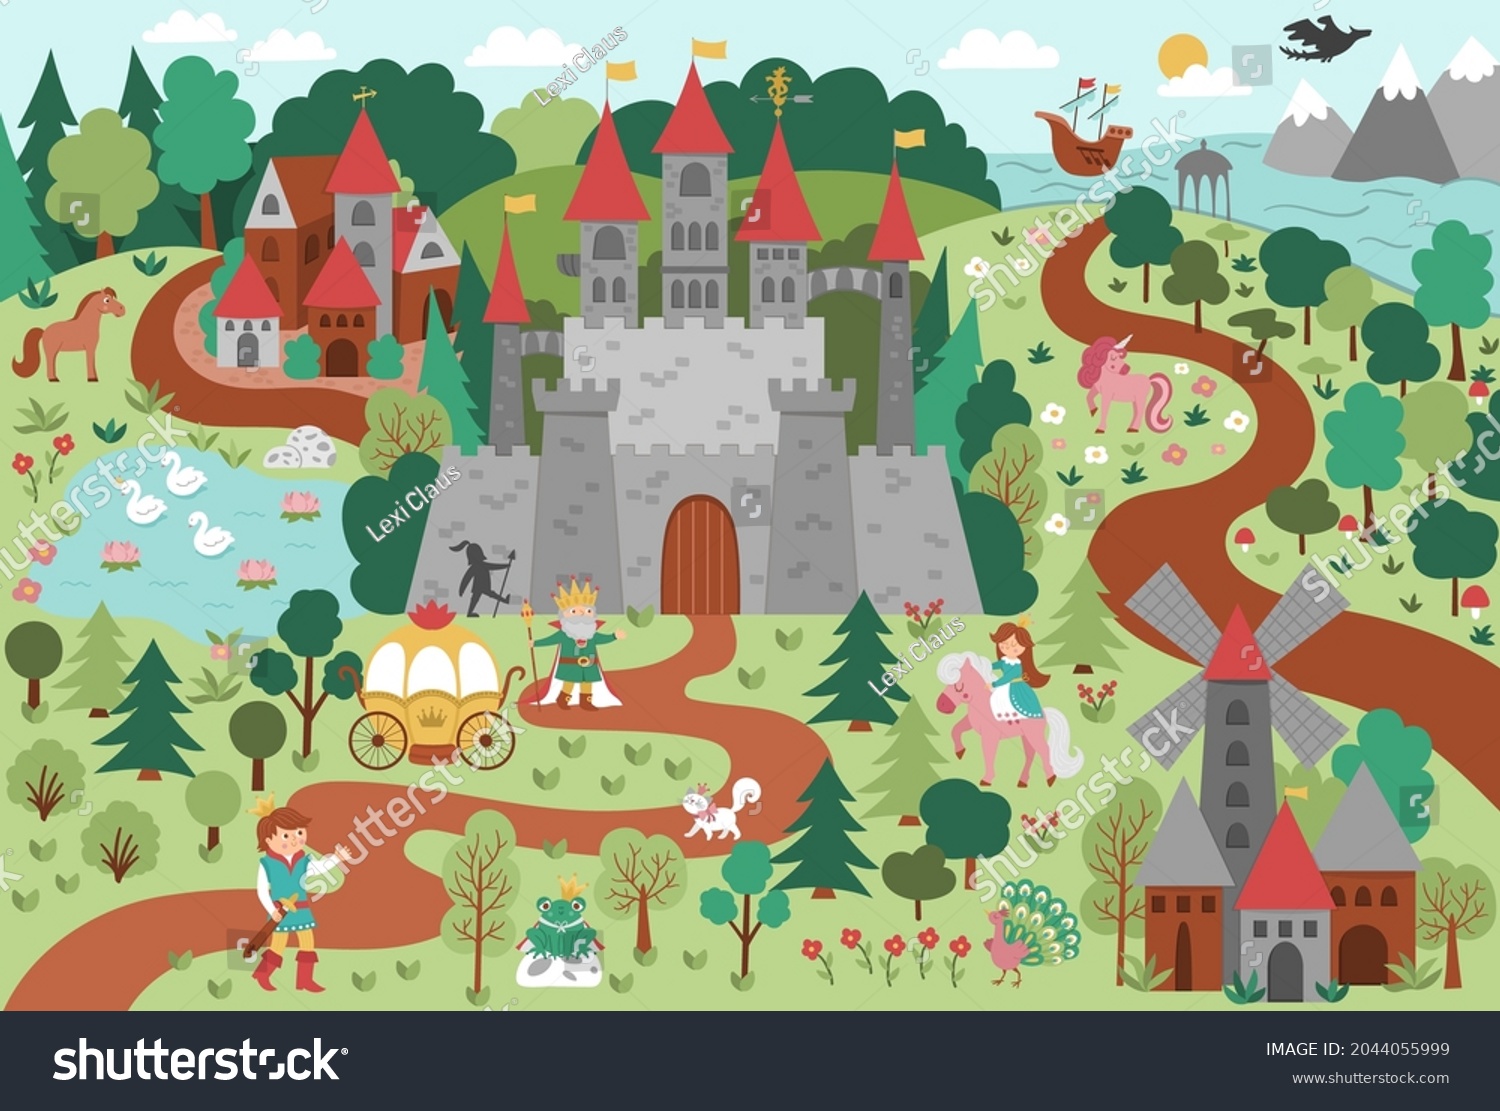 SVG of Vector fairytale kingdom illustration. Fantasy castle and characters picture. Cute magic fairy tale background with palace, sea, prince, princess, forest. Detailed medieval village landscape
 svg